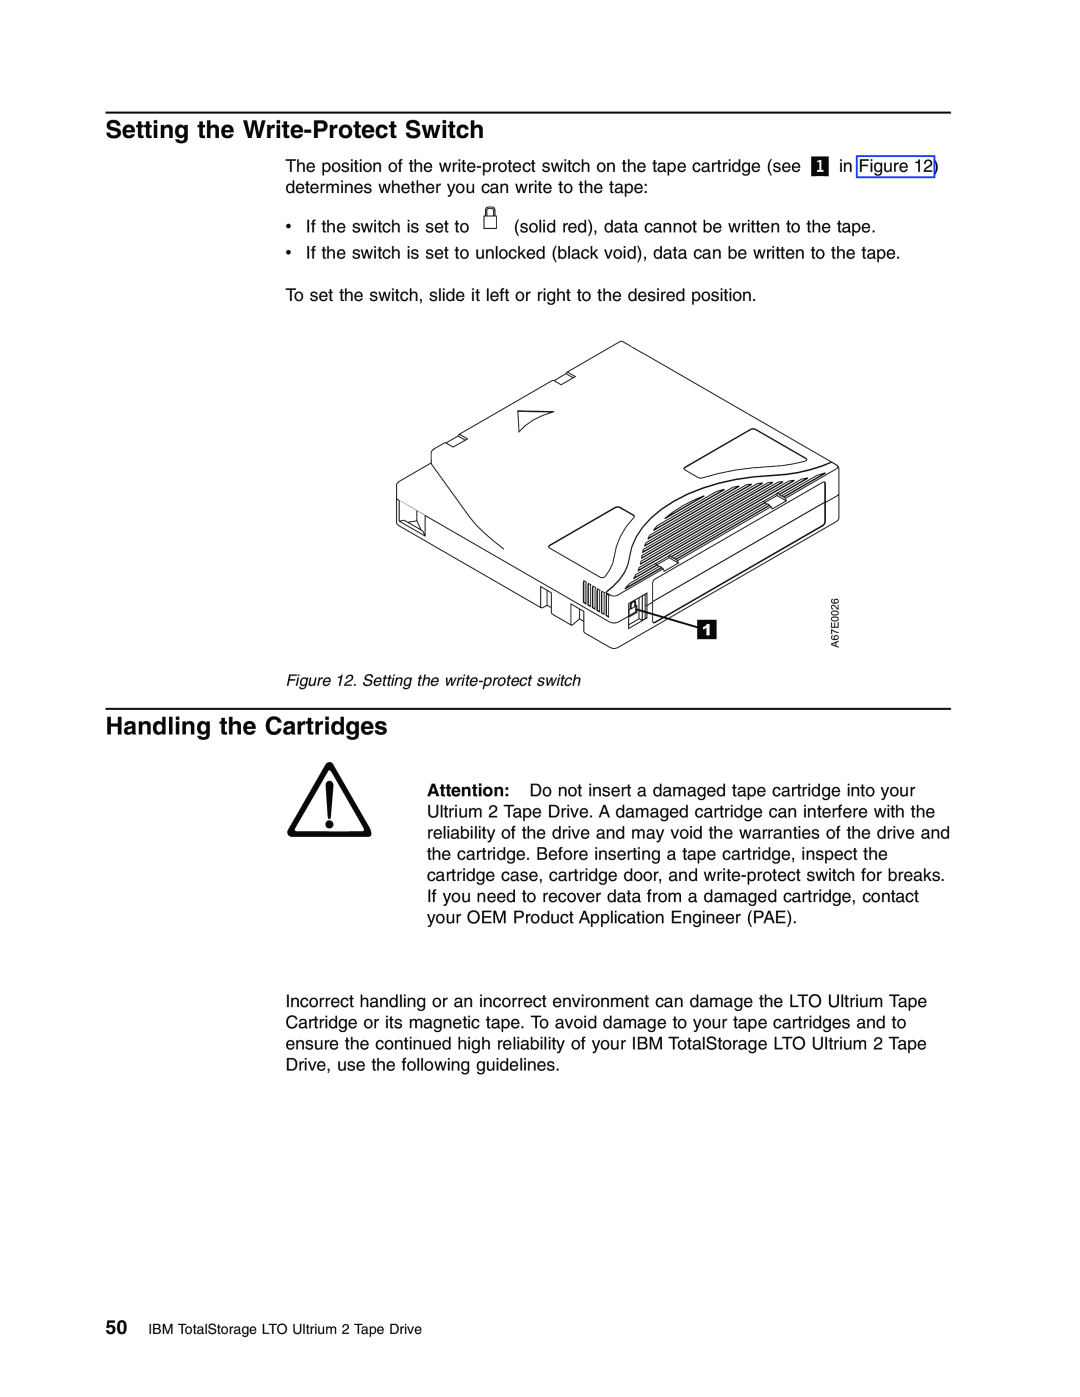 IBM T400F manual Setting the Write-Protect Switch, Handling the Cartridges 